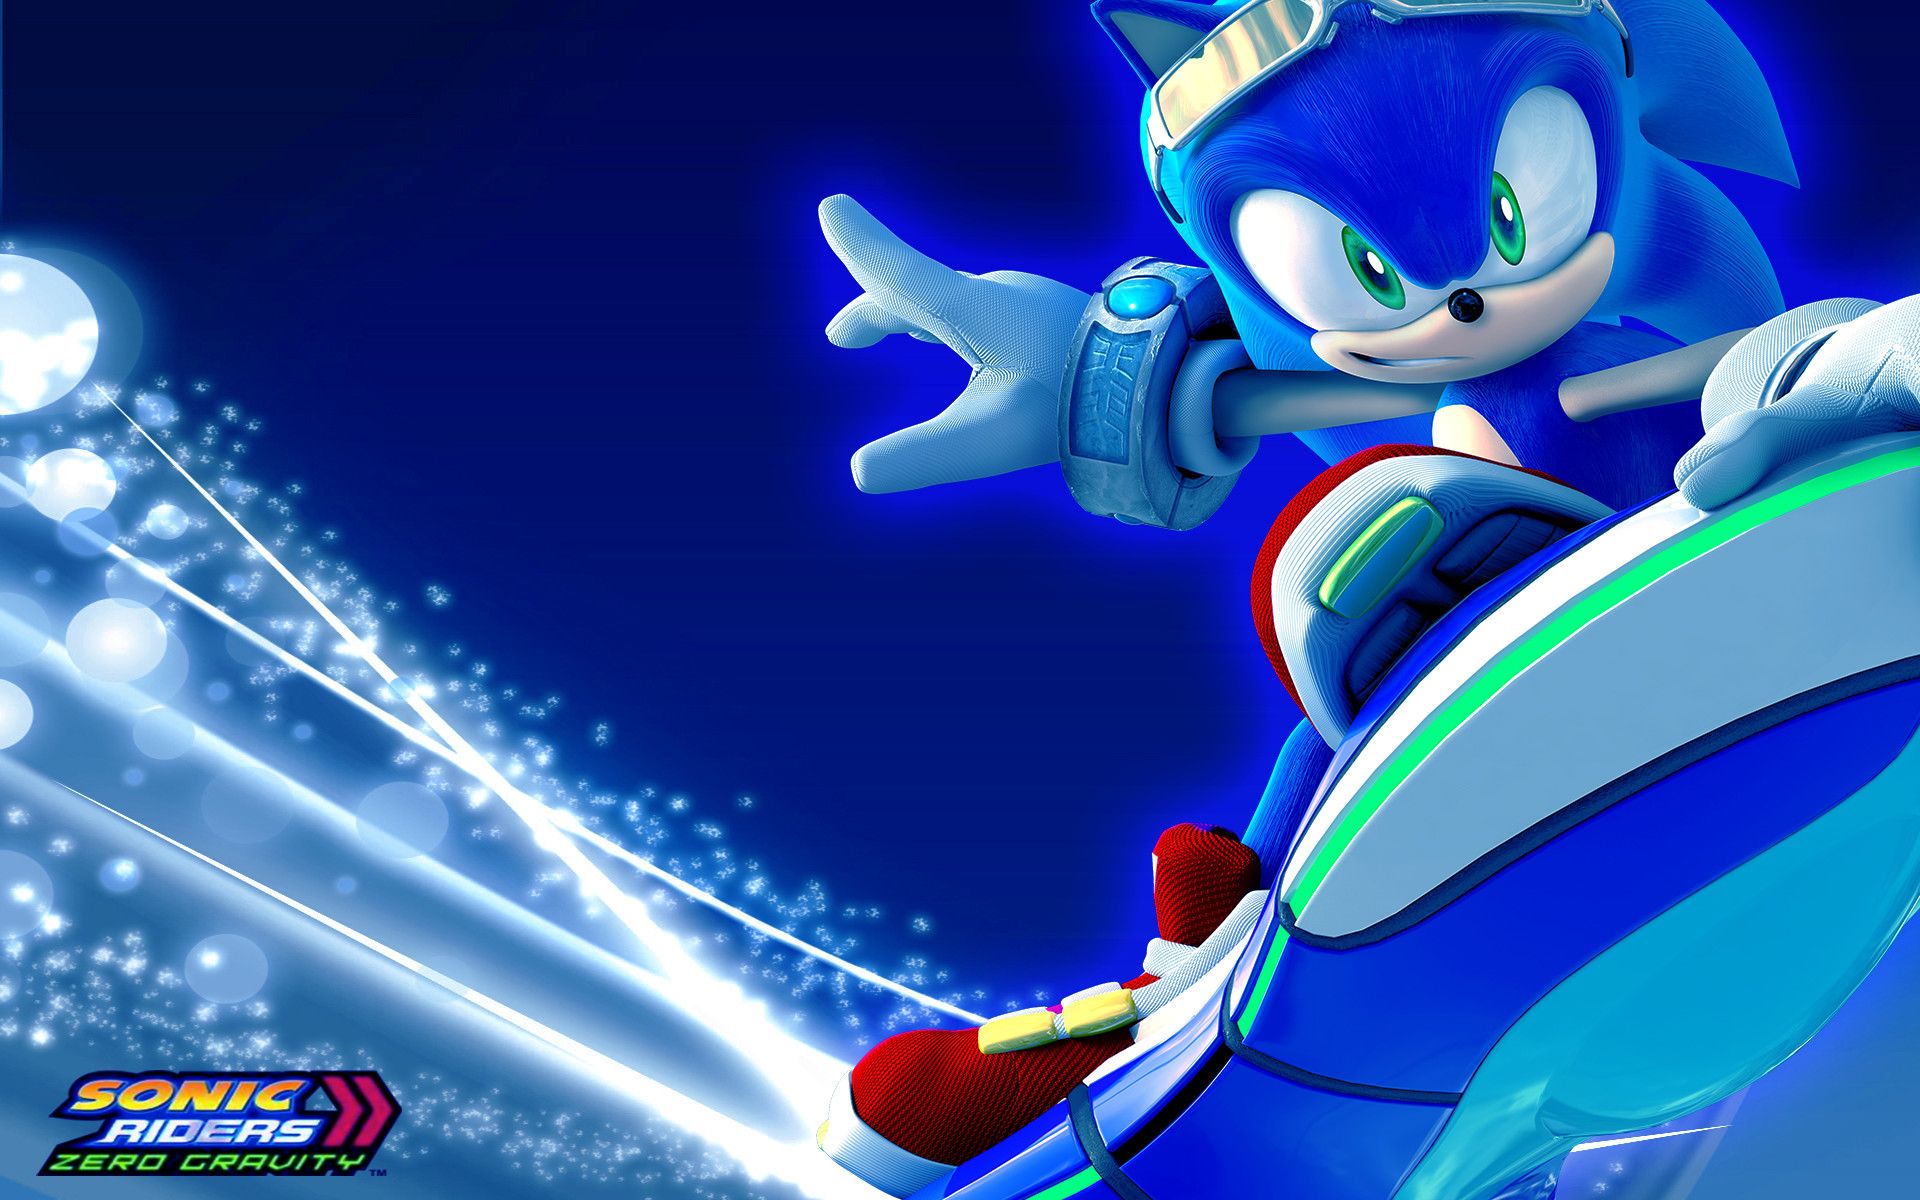 Sonic the Hedgehog Backgrounds.